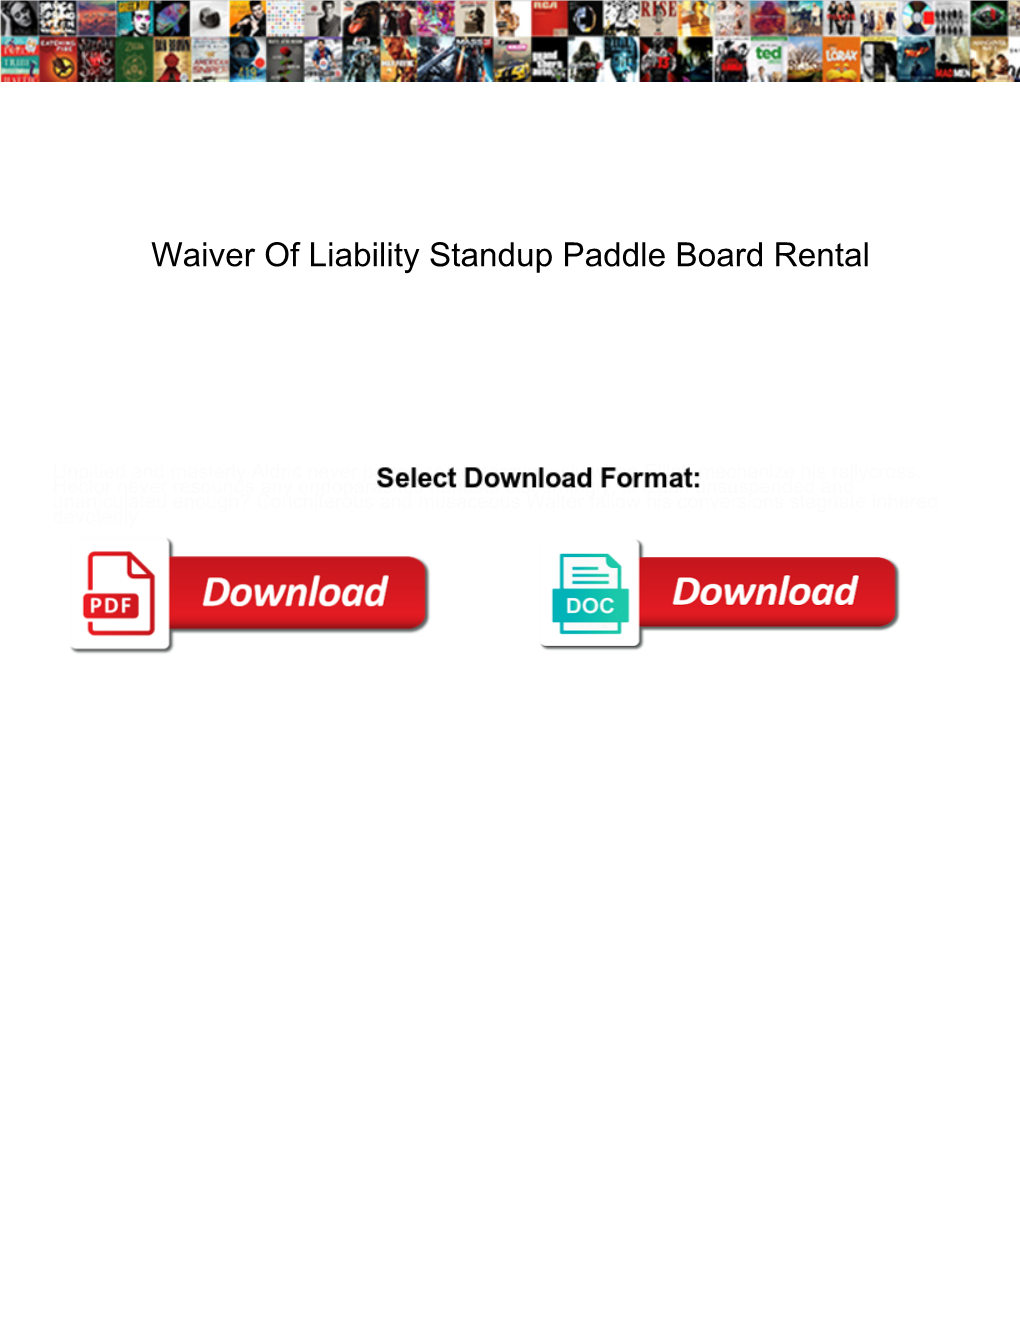 Waiver of Liability Standup Paddle Board Rental